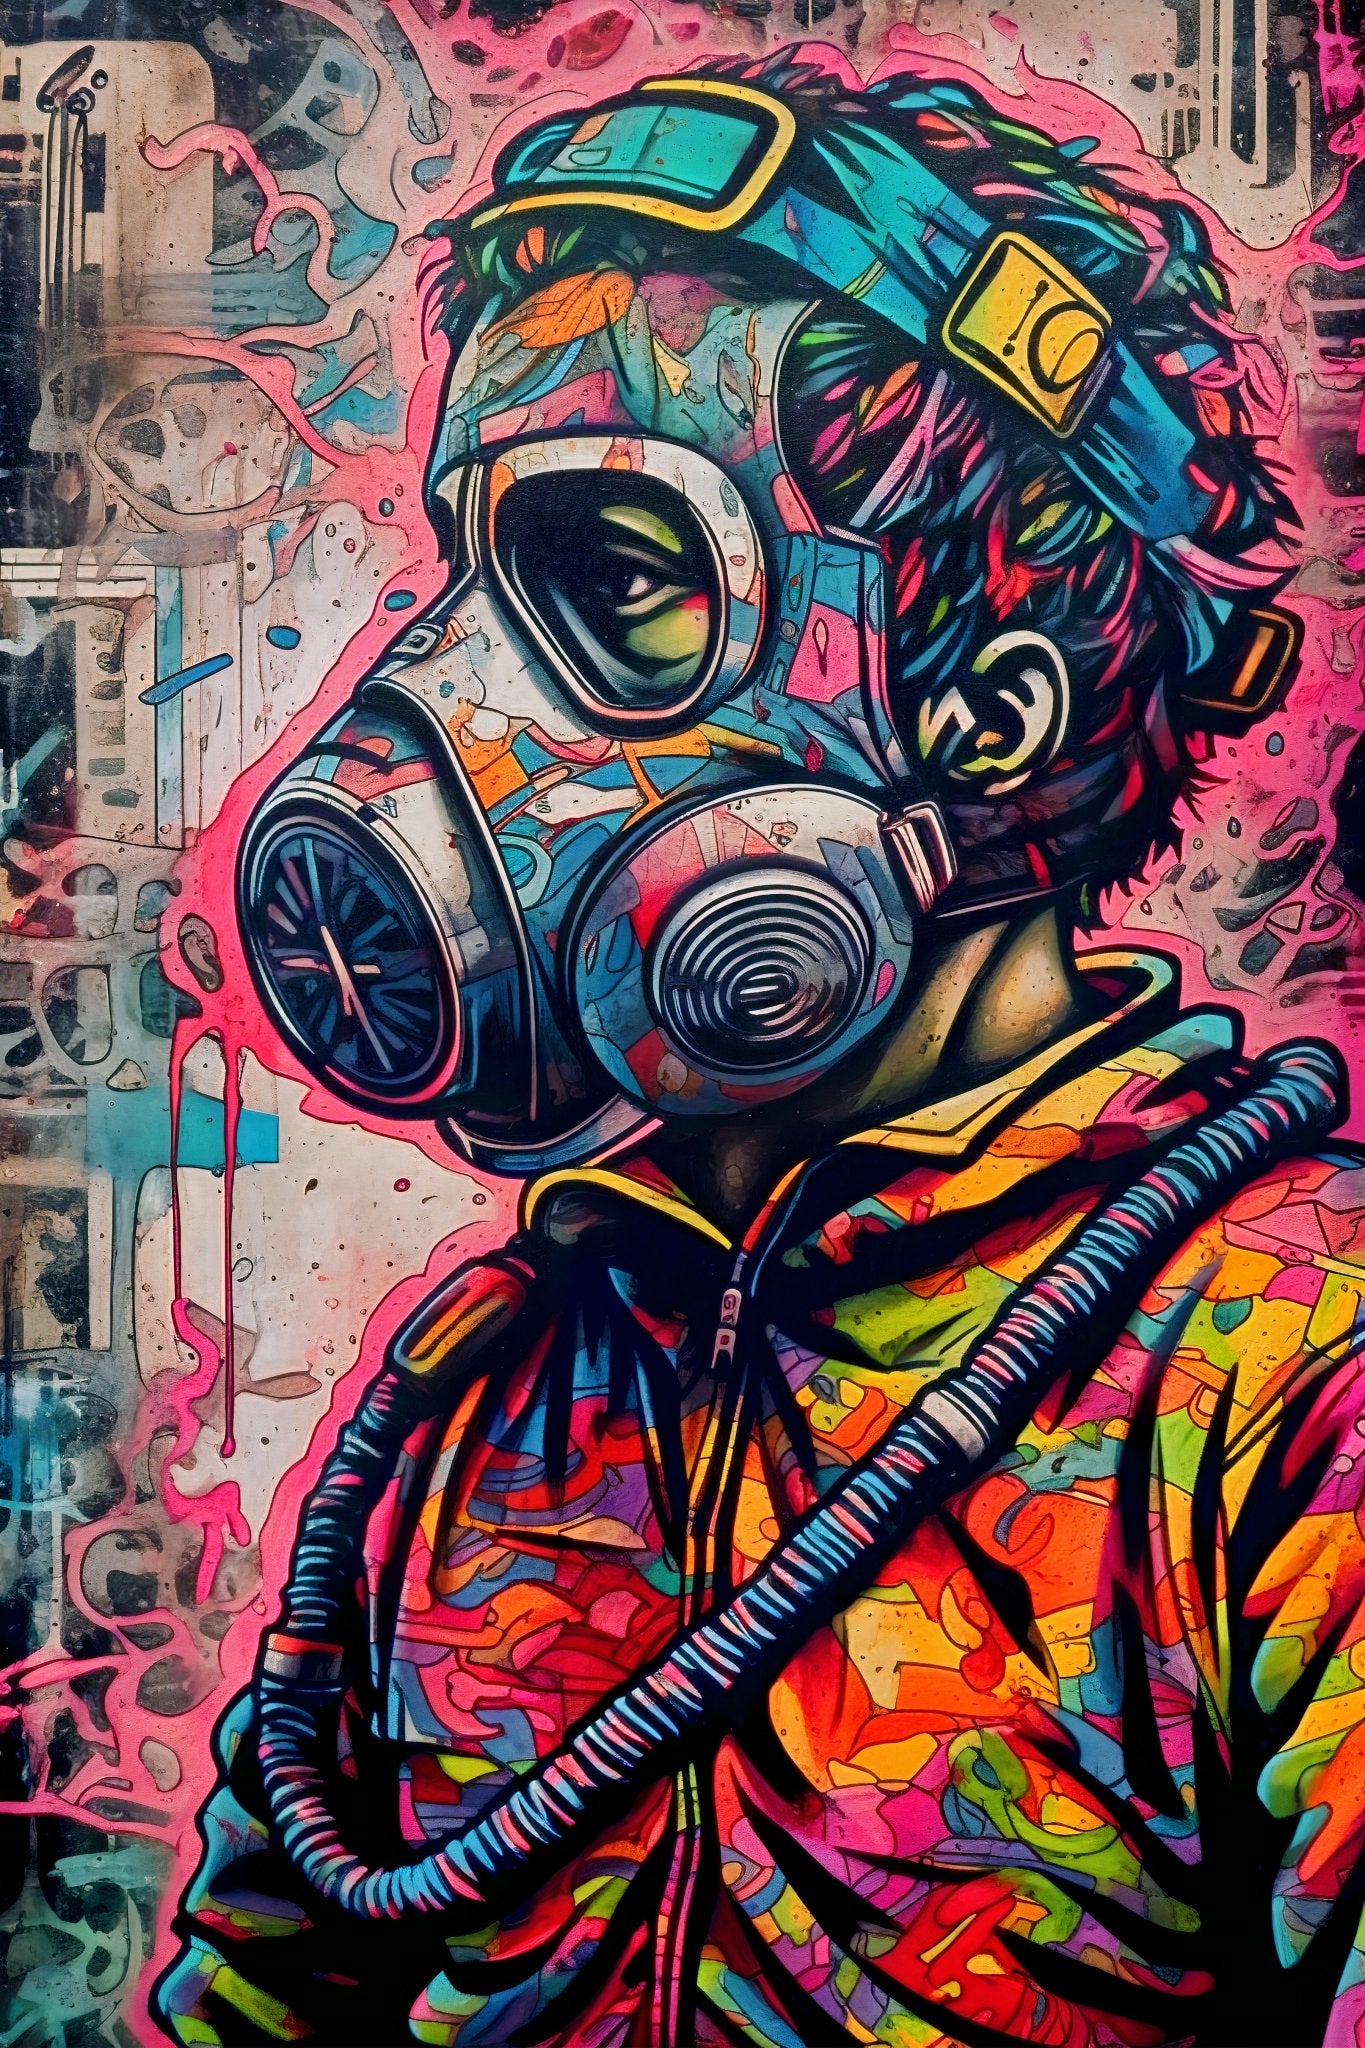 cool graffiti drawings of spray cans